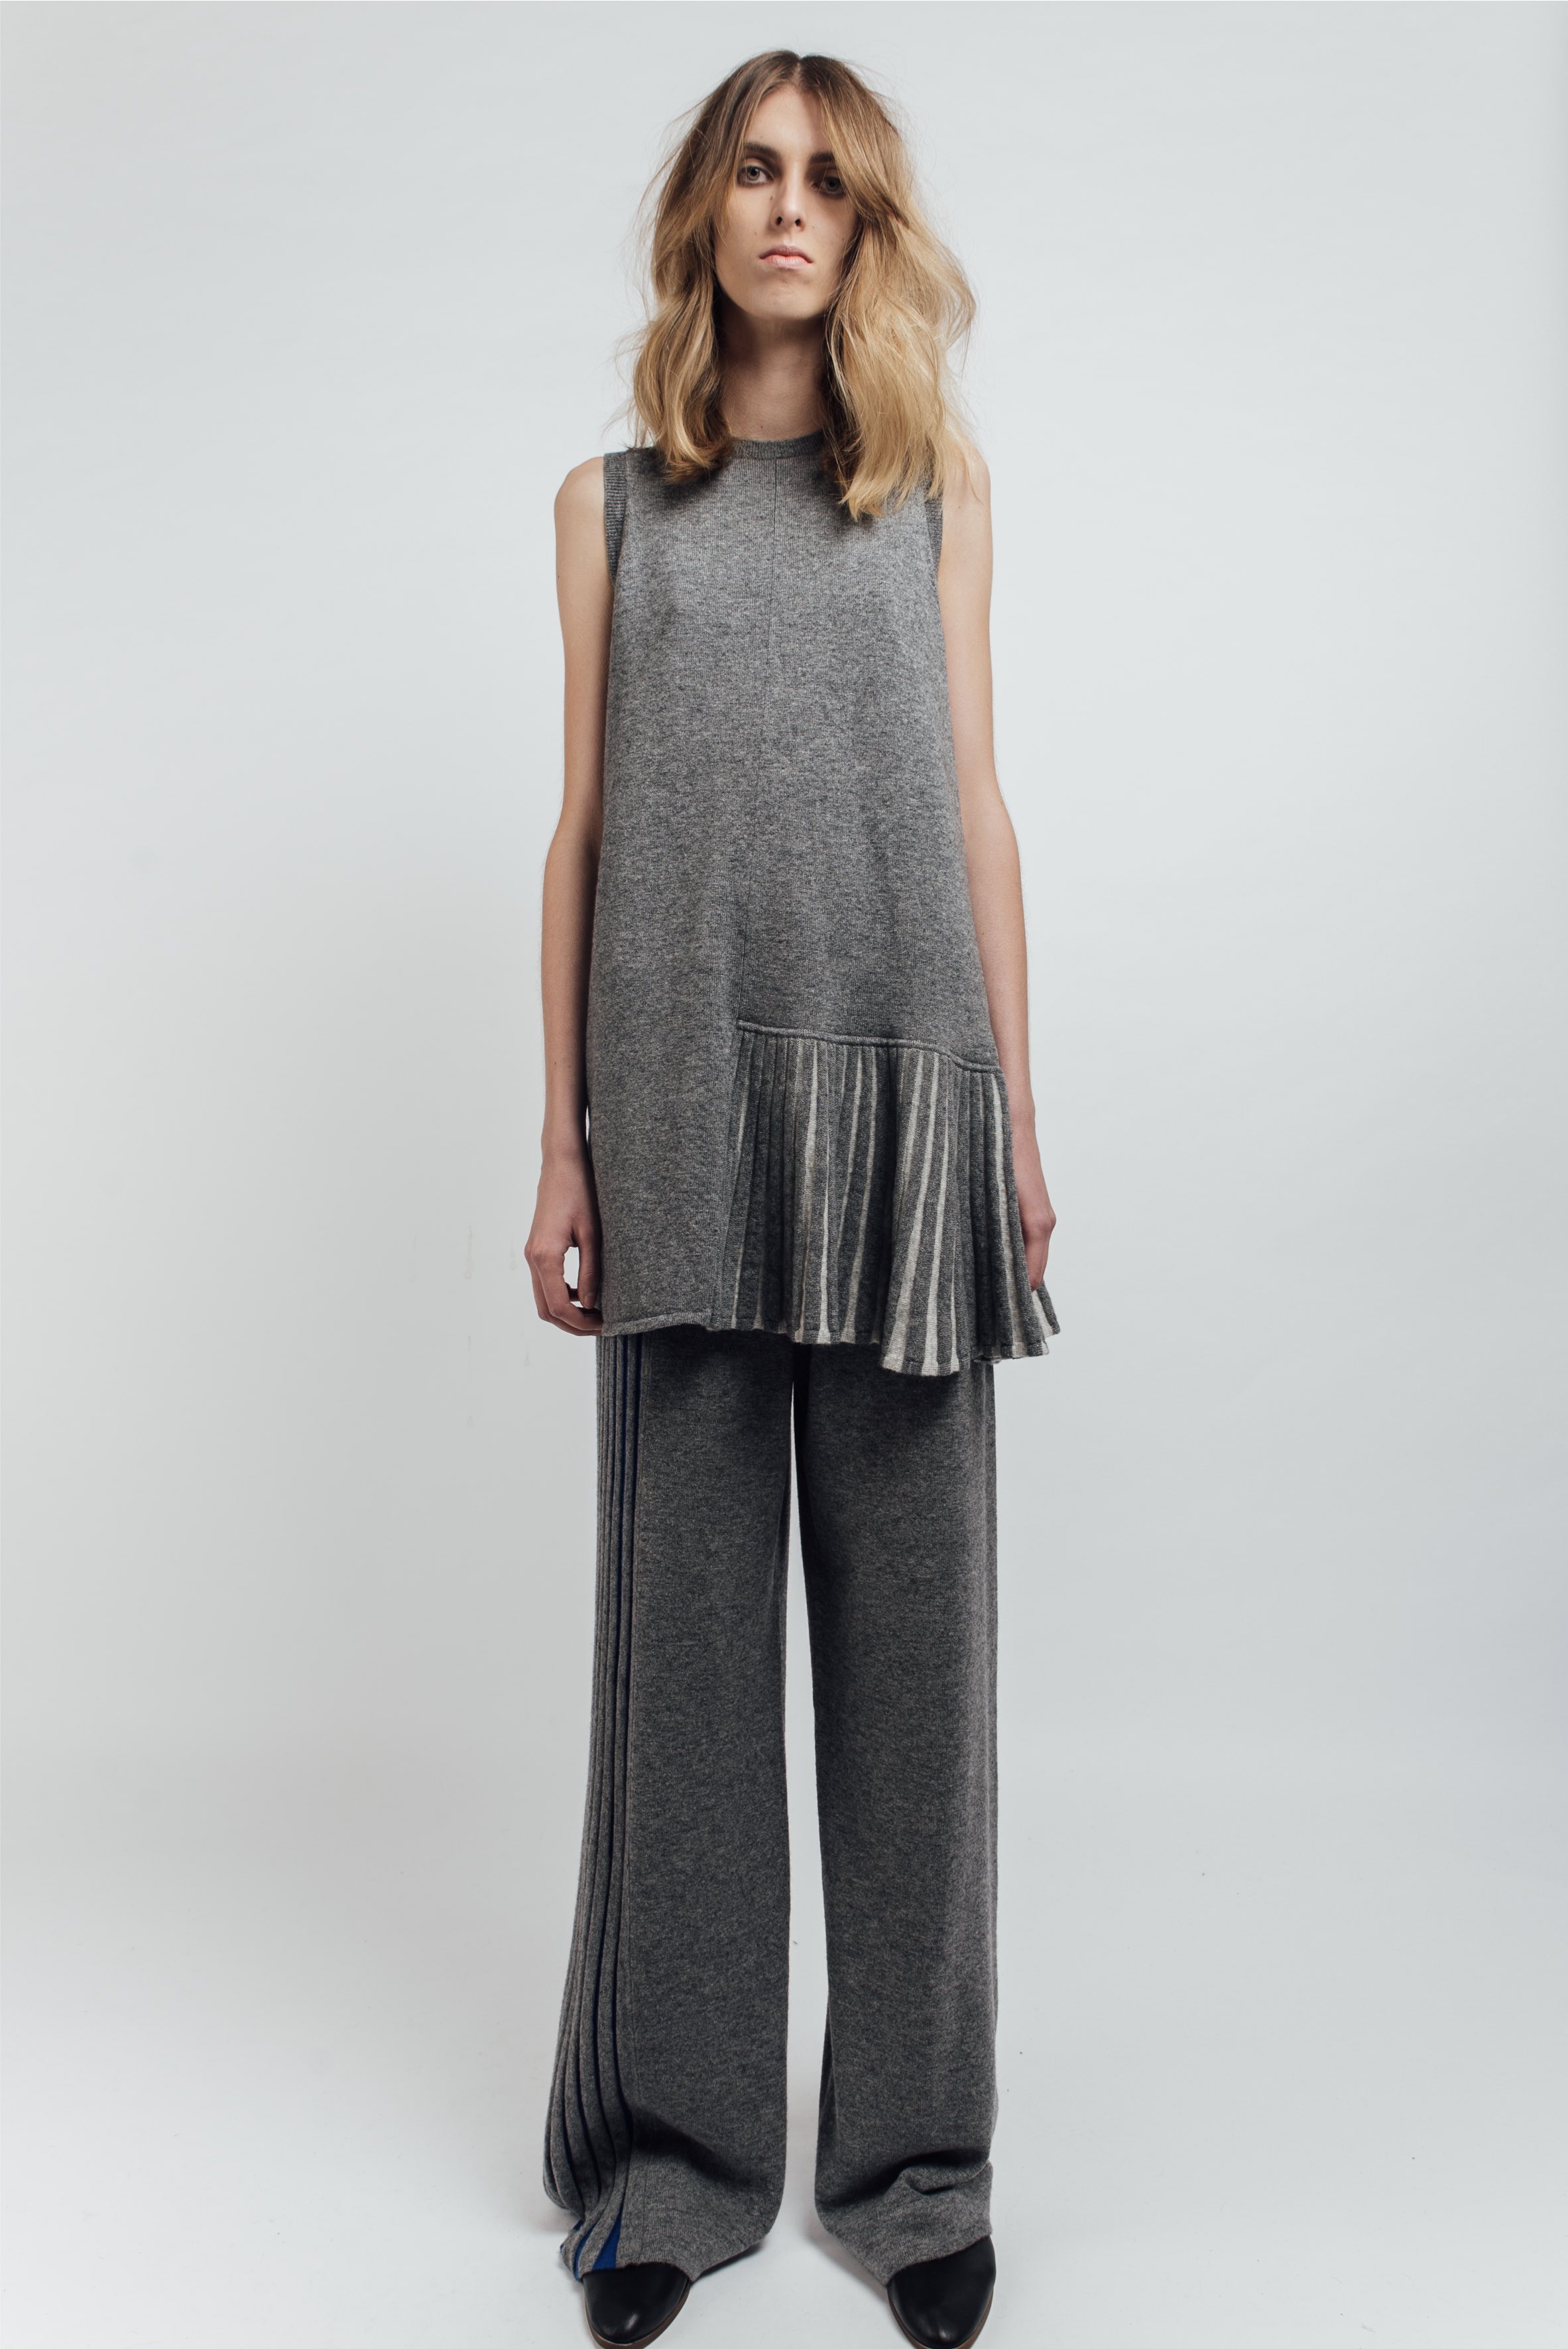 Cashmere top with side pleat detail